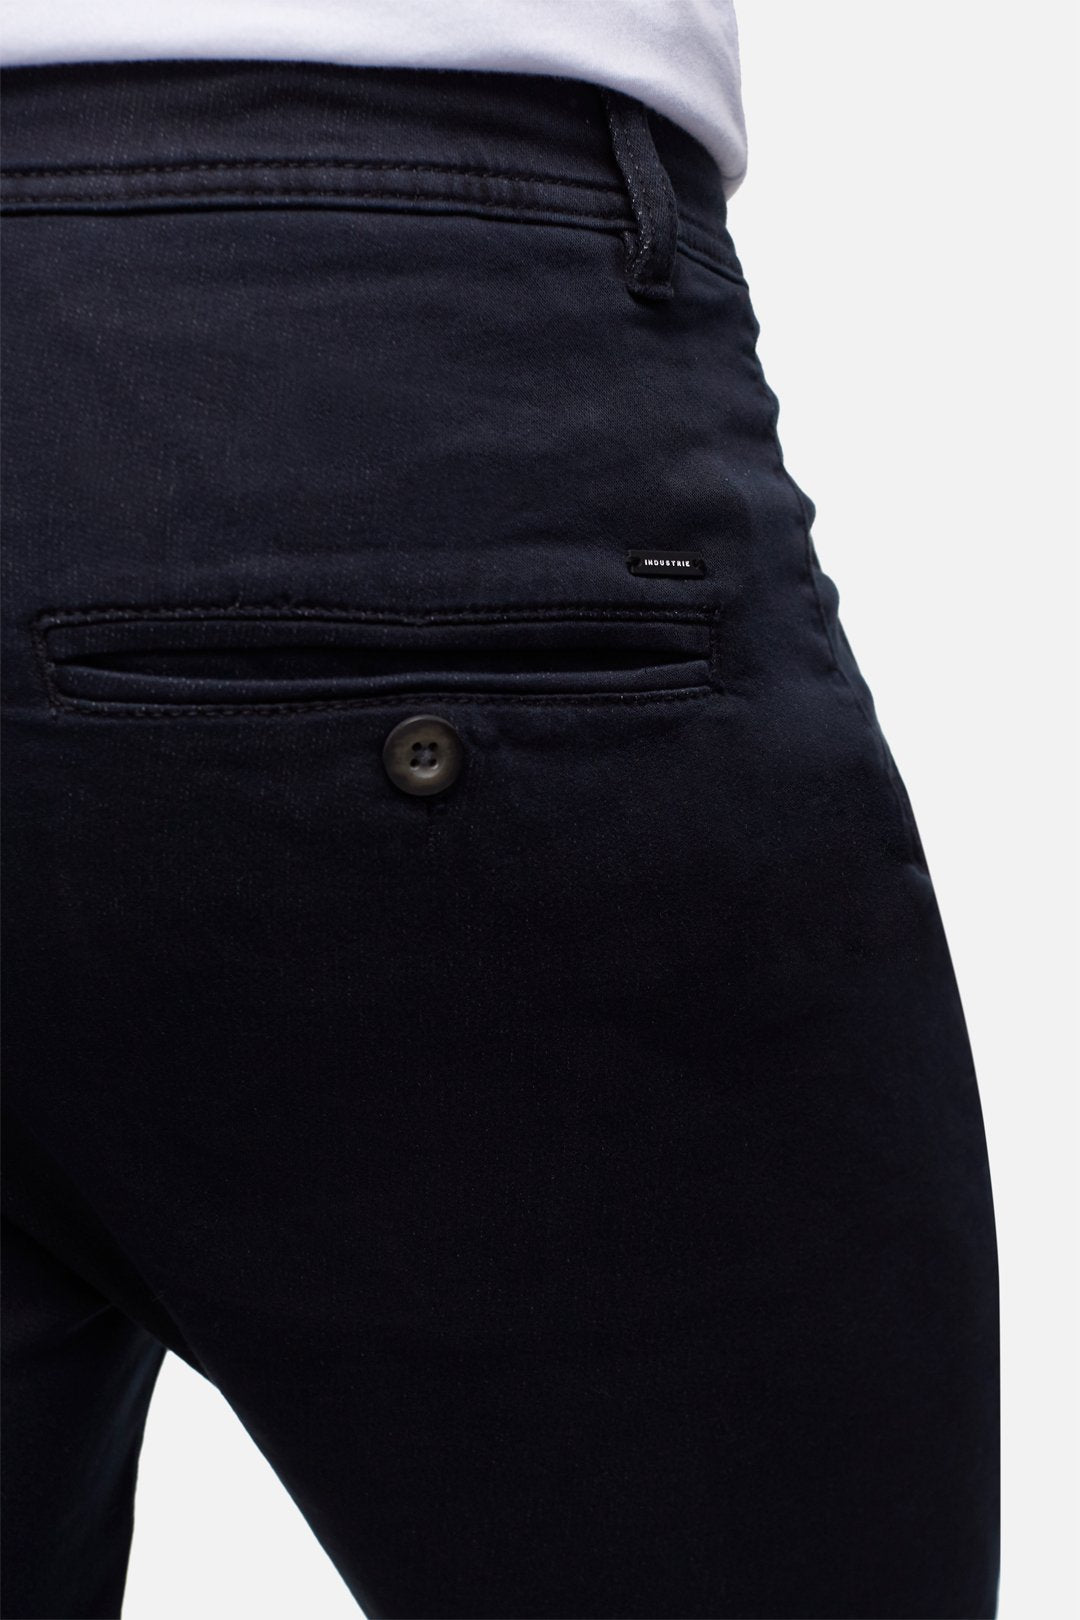 INDUSTRIE - The Drifter Chino Pant - RAW